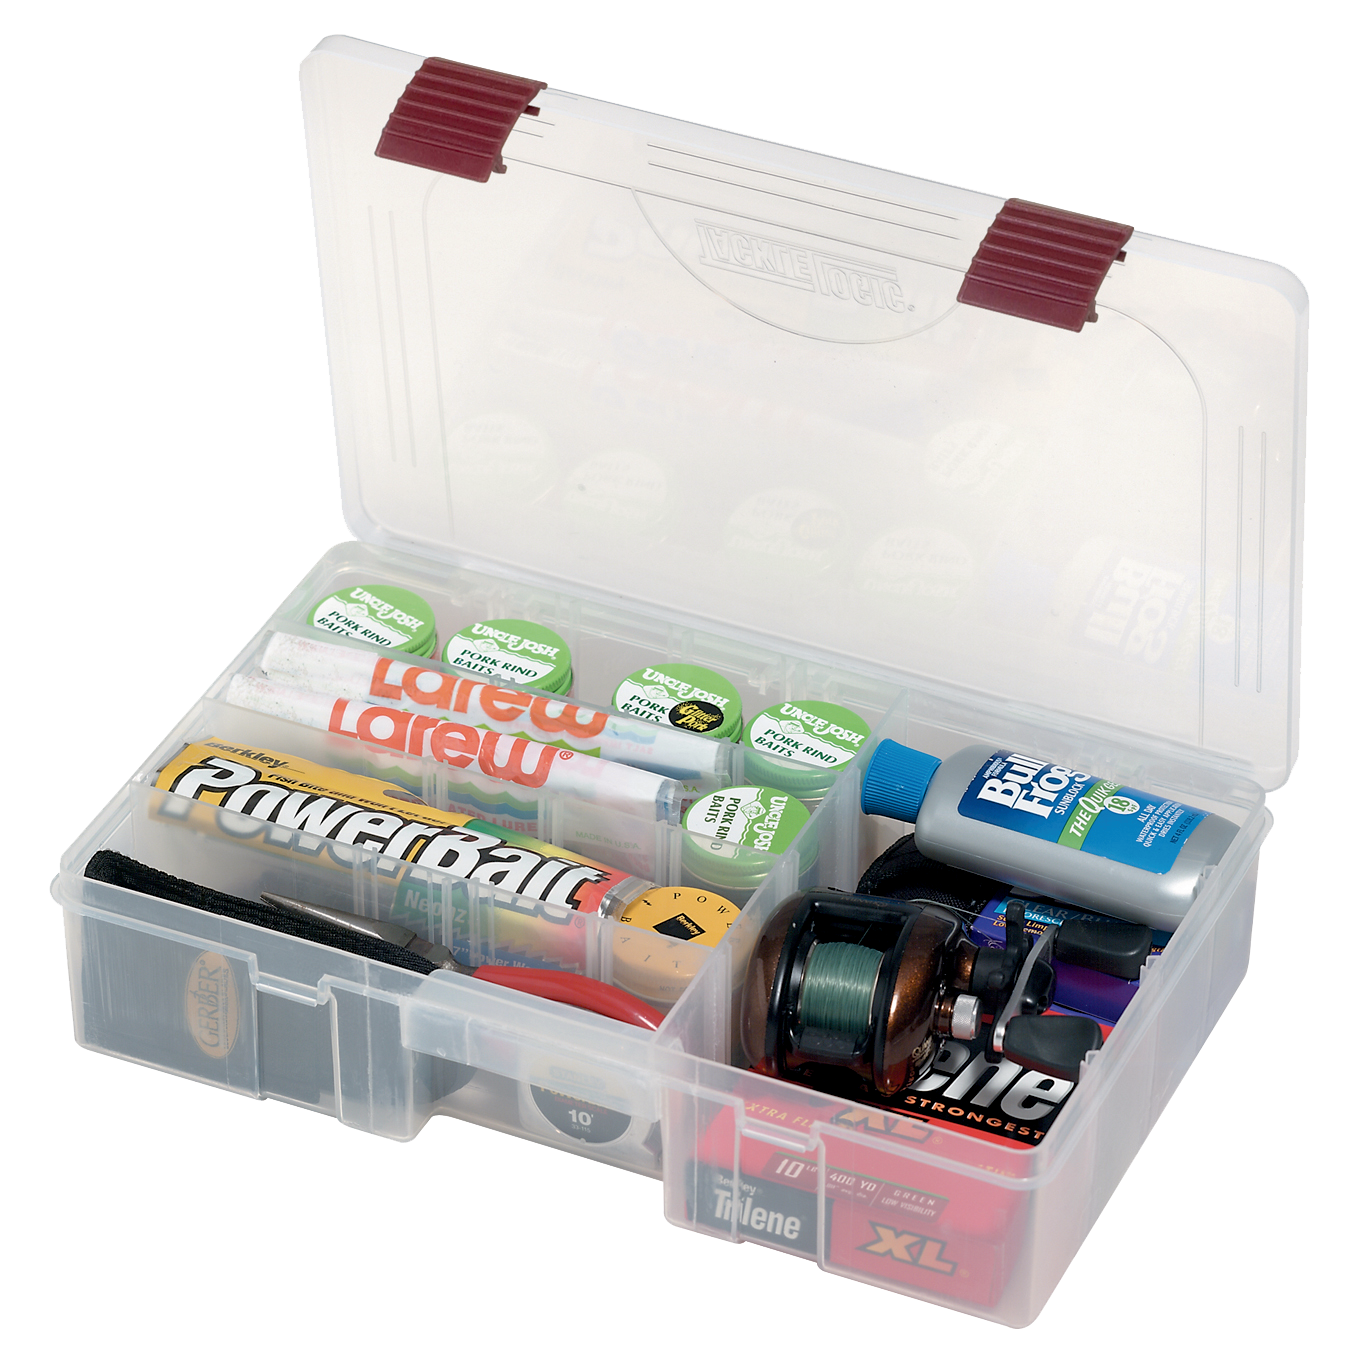 Plano ProLatch Stowaway Large 3700 Clear Organizer Tackle Box, Large, Clear